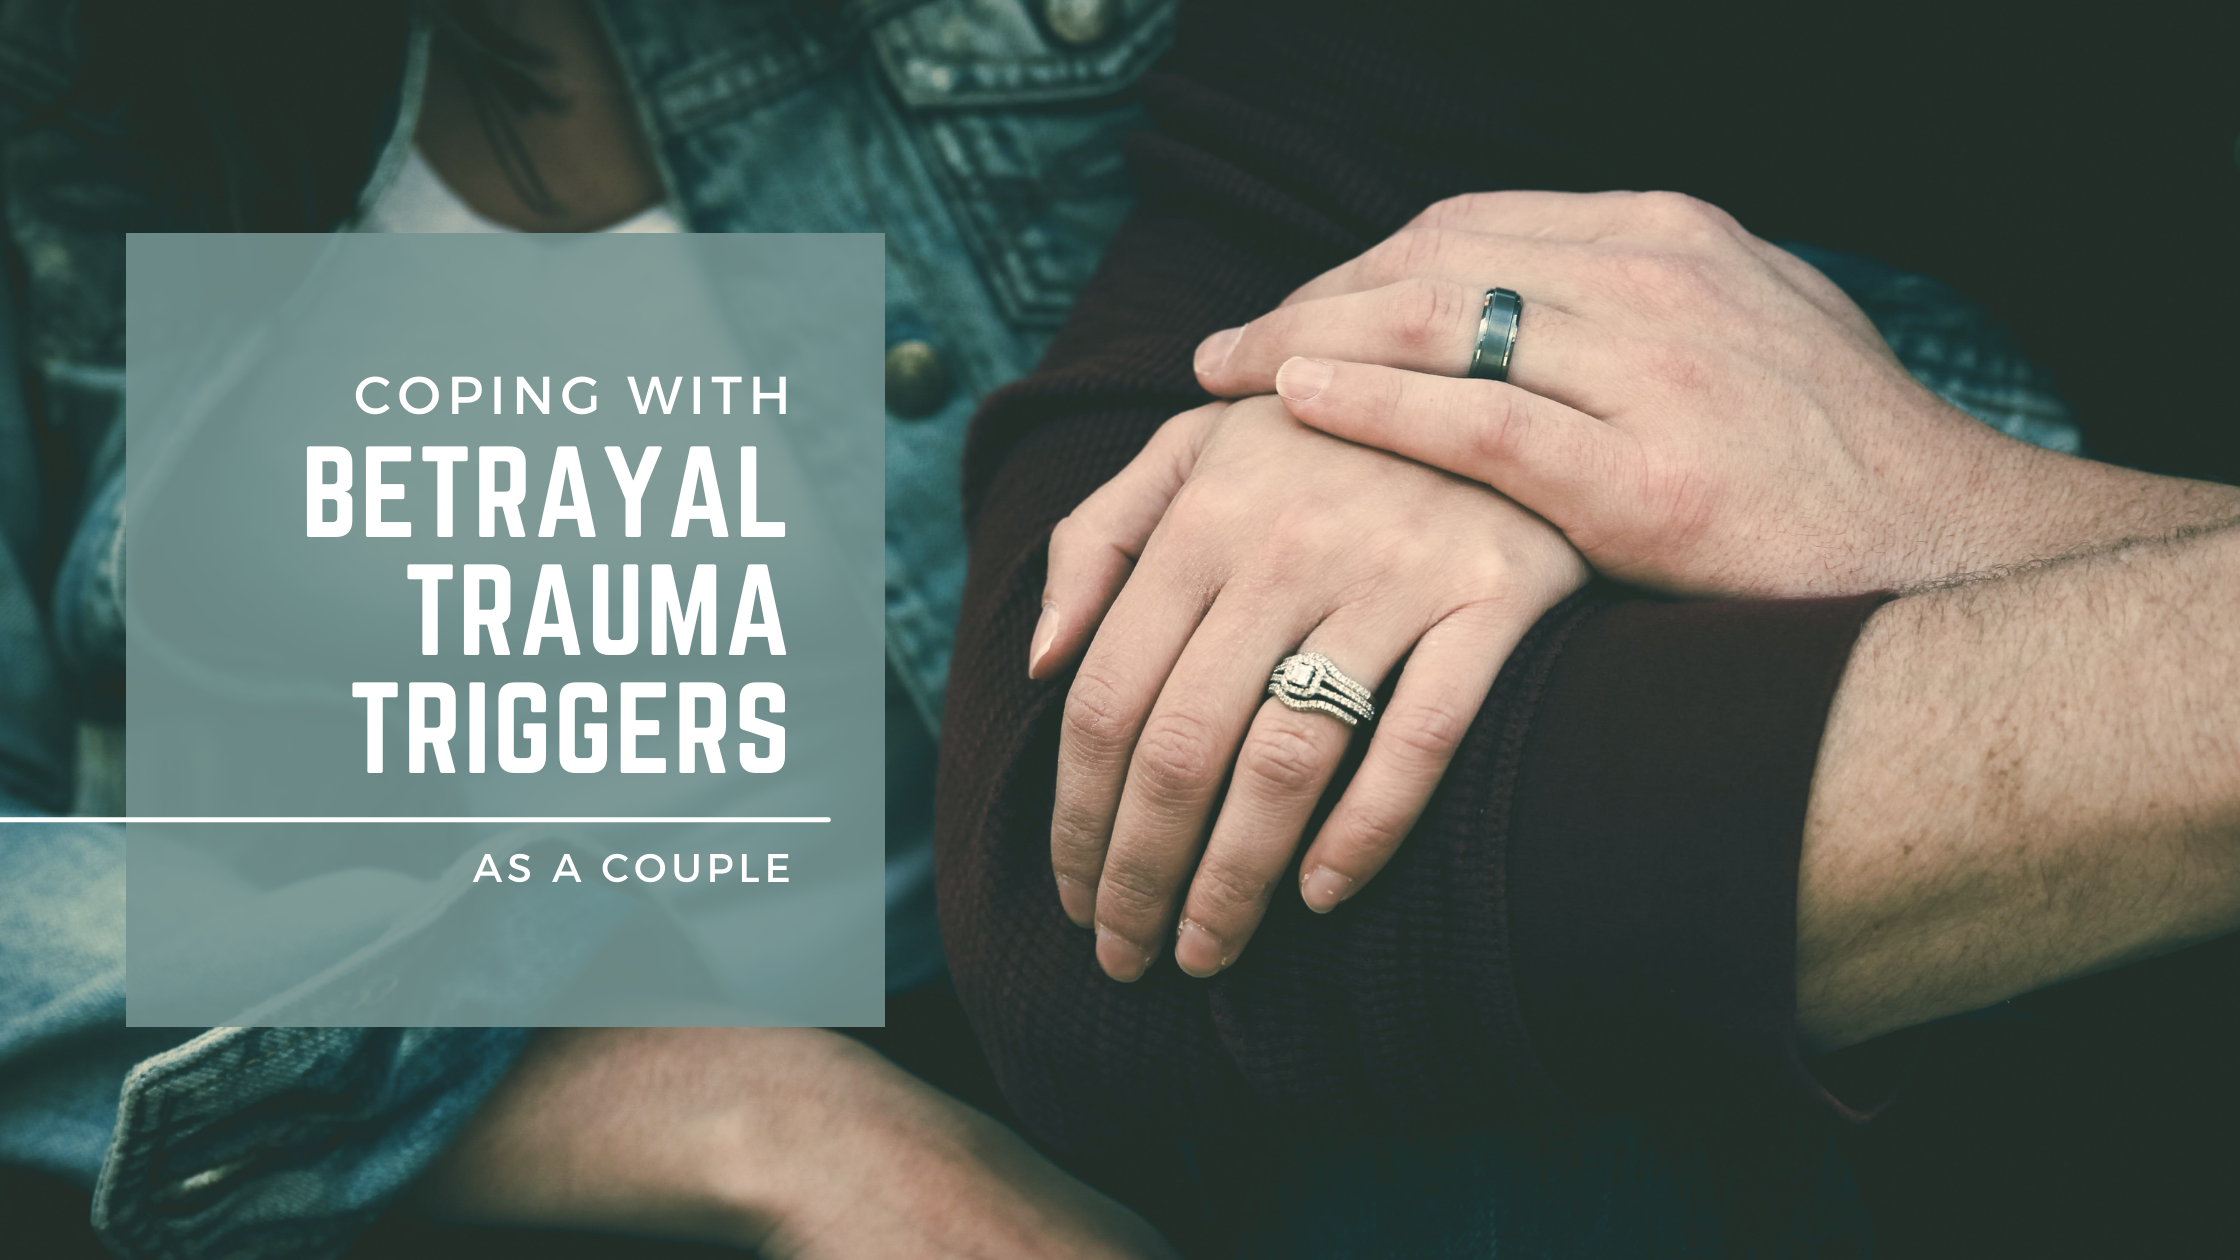 Coping With Betrayal Trauma Triggers as a Couple — Restored Hope Counseling Services pic